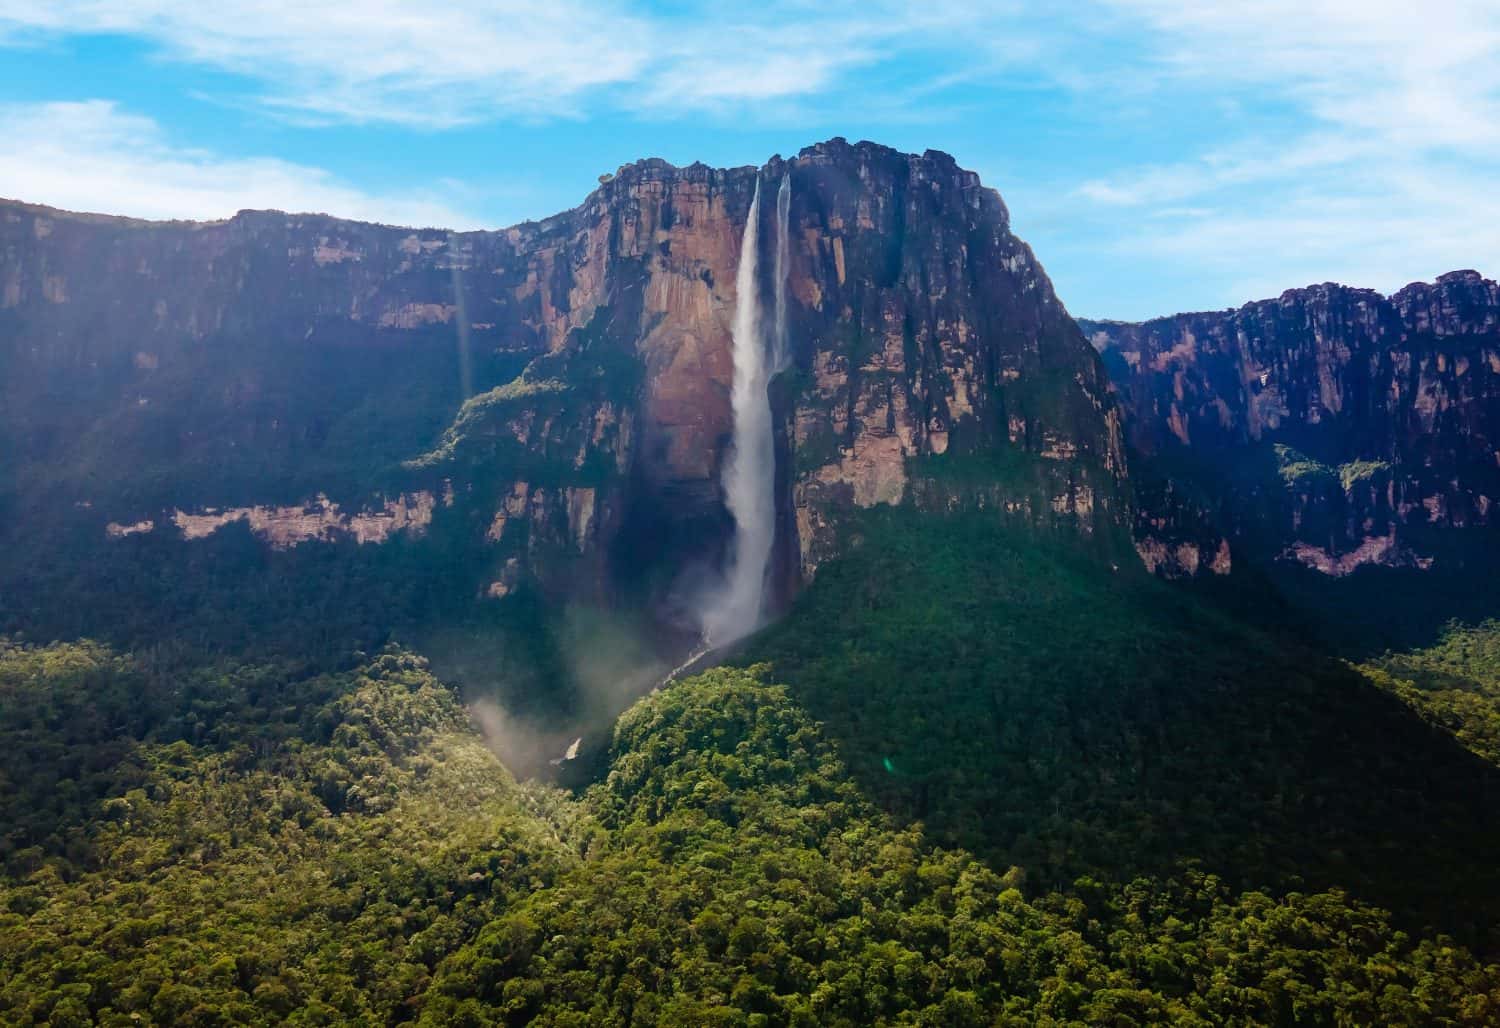 Scenic Aerial view of Angel Fall world's highest waterfall in Venezuela